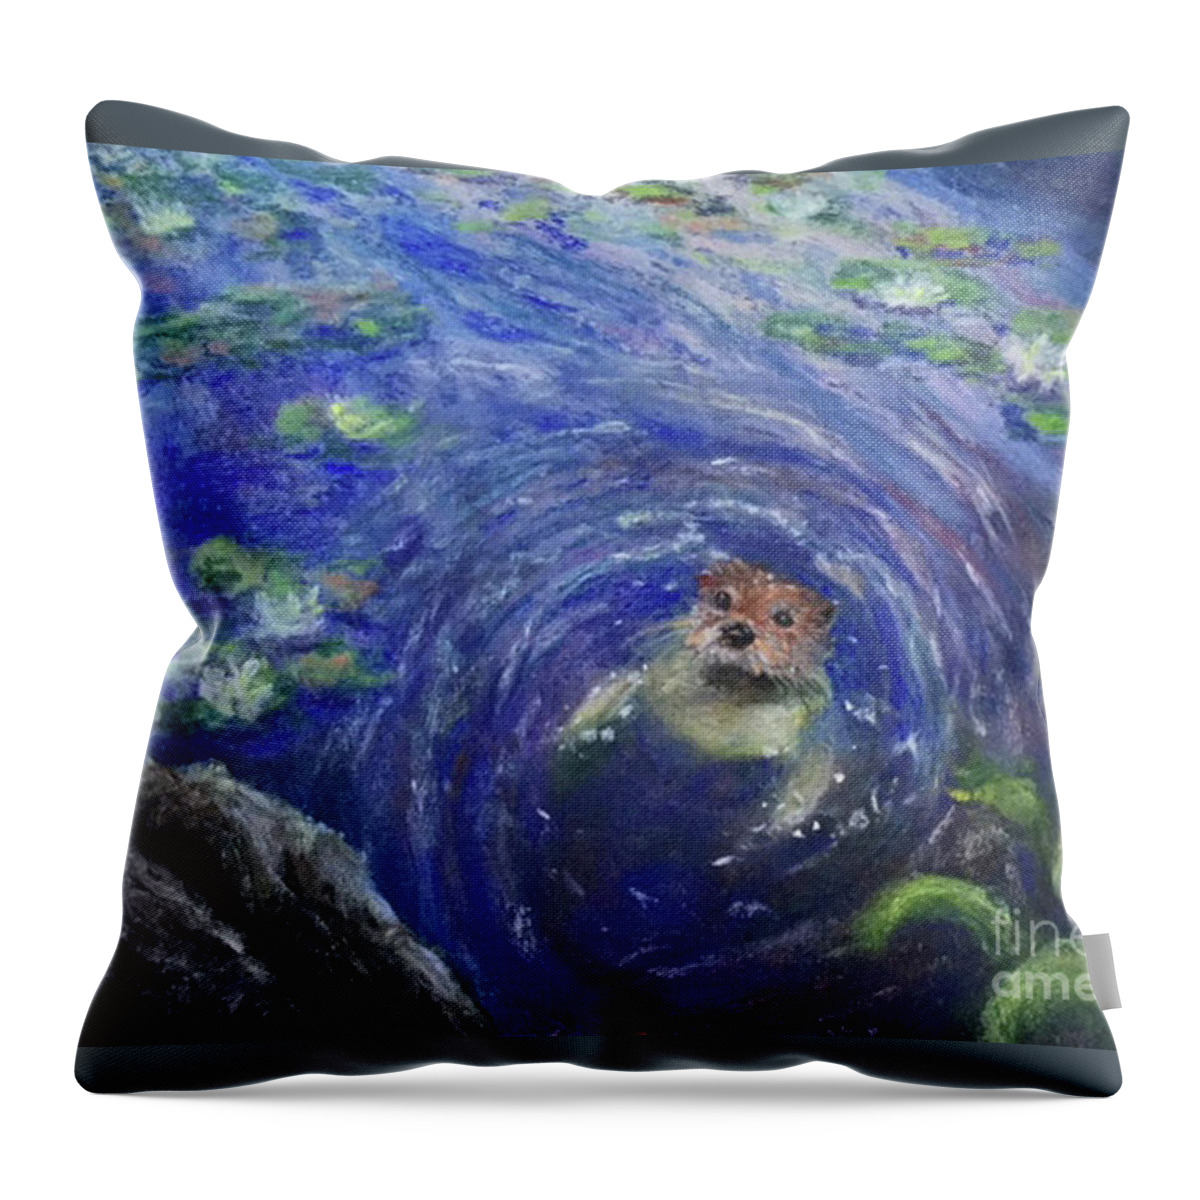 Otter Throw Pillow featuring the painting Hello by Susan Sarabasha